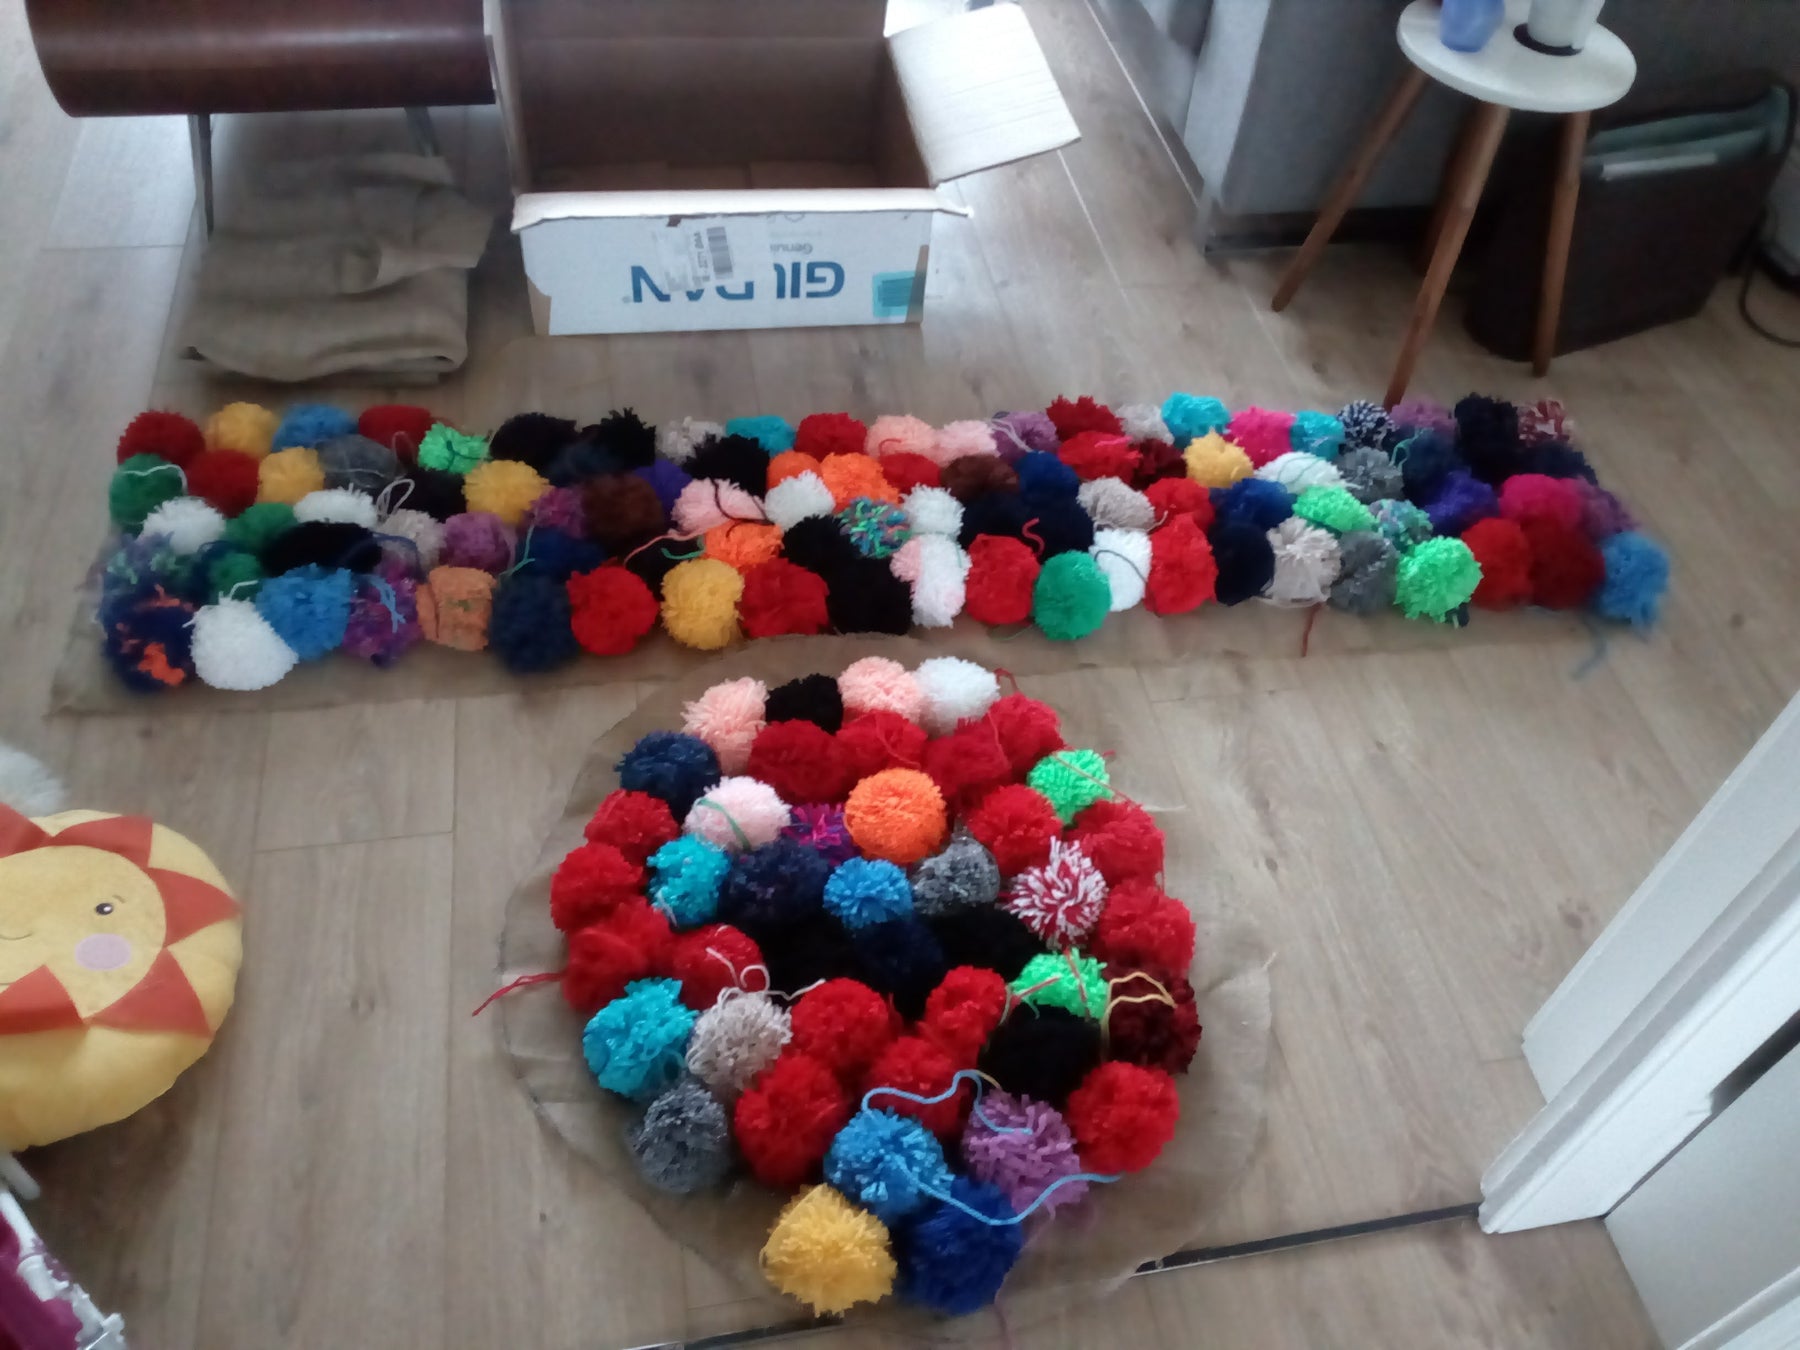 Step-bystep guide for the pom pom chair project